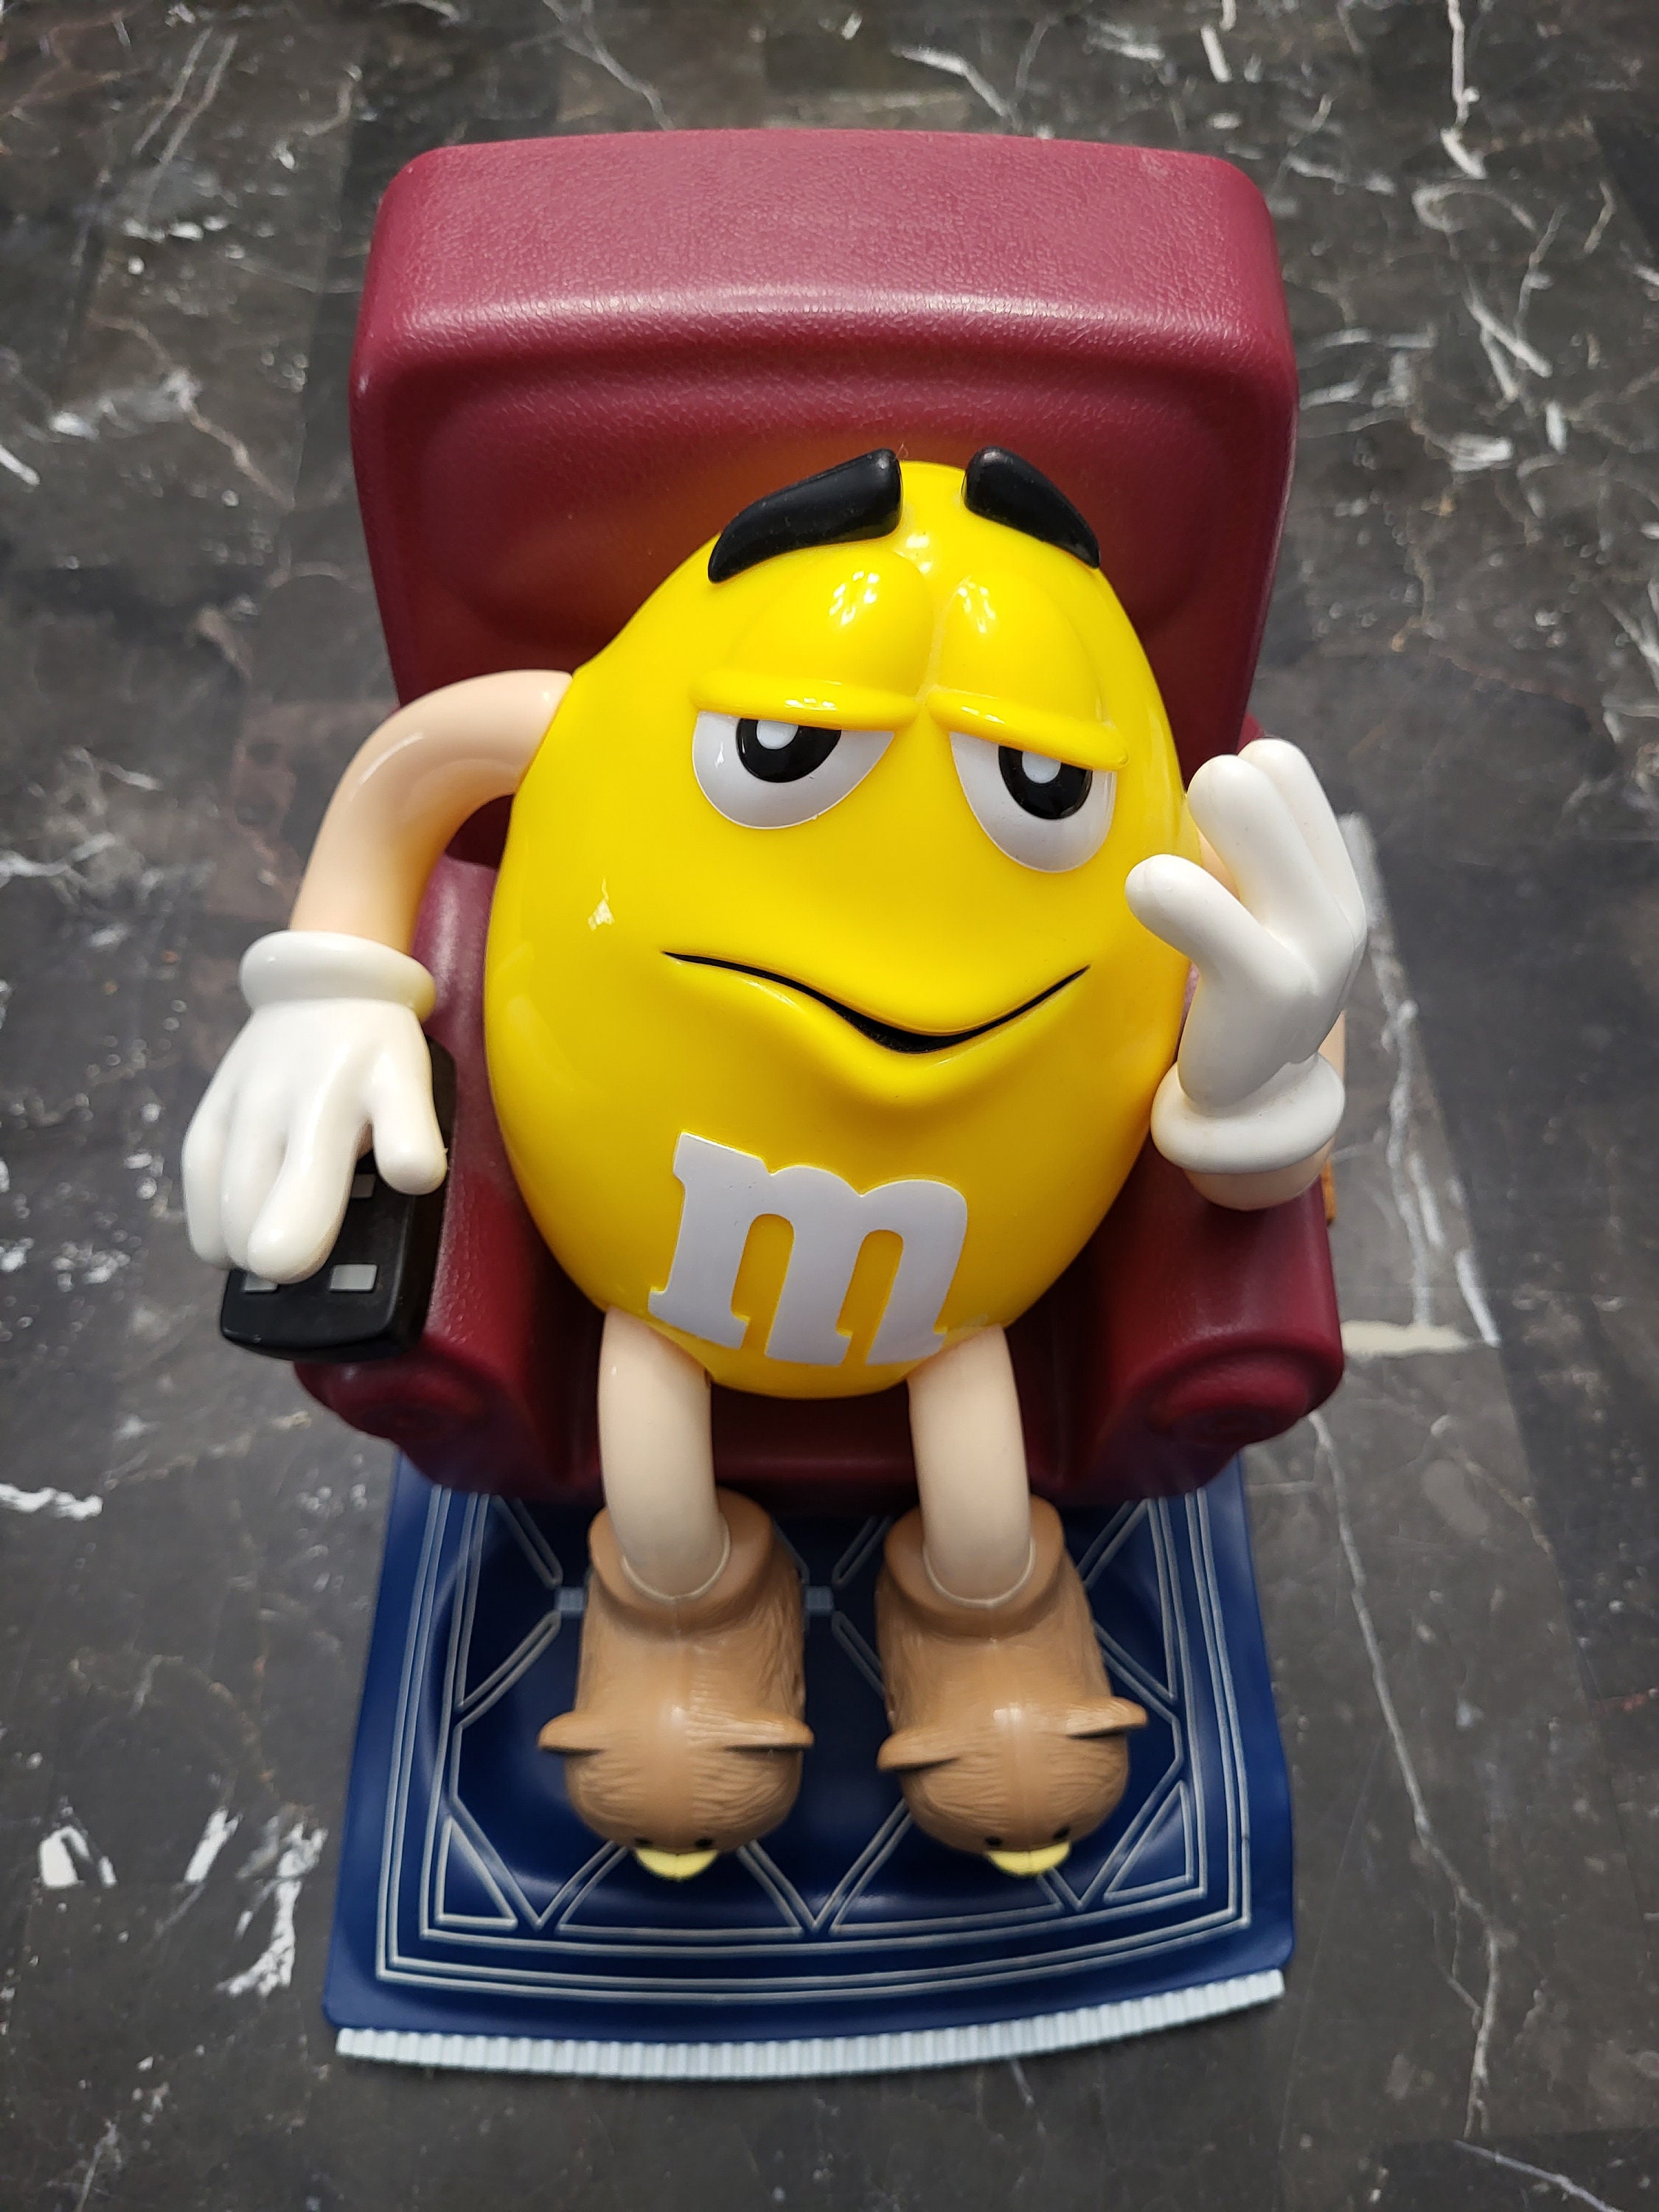 Vintage M&M "Couch Potato" Yellow M&M Candy